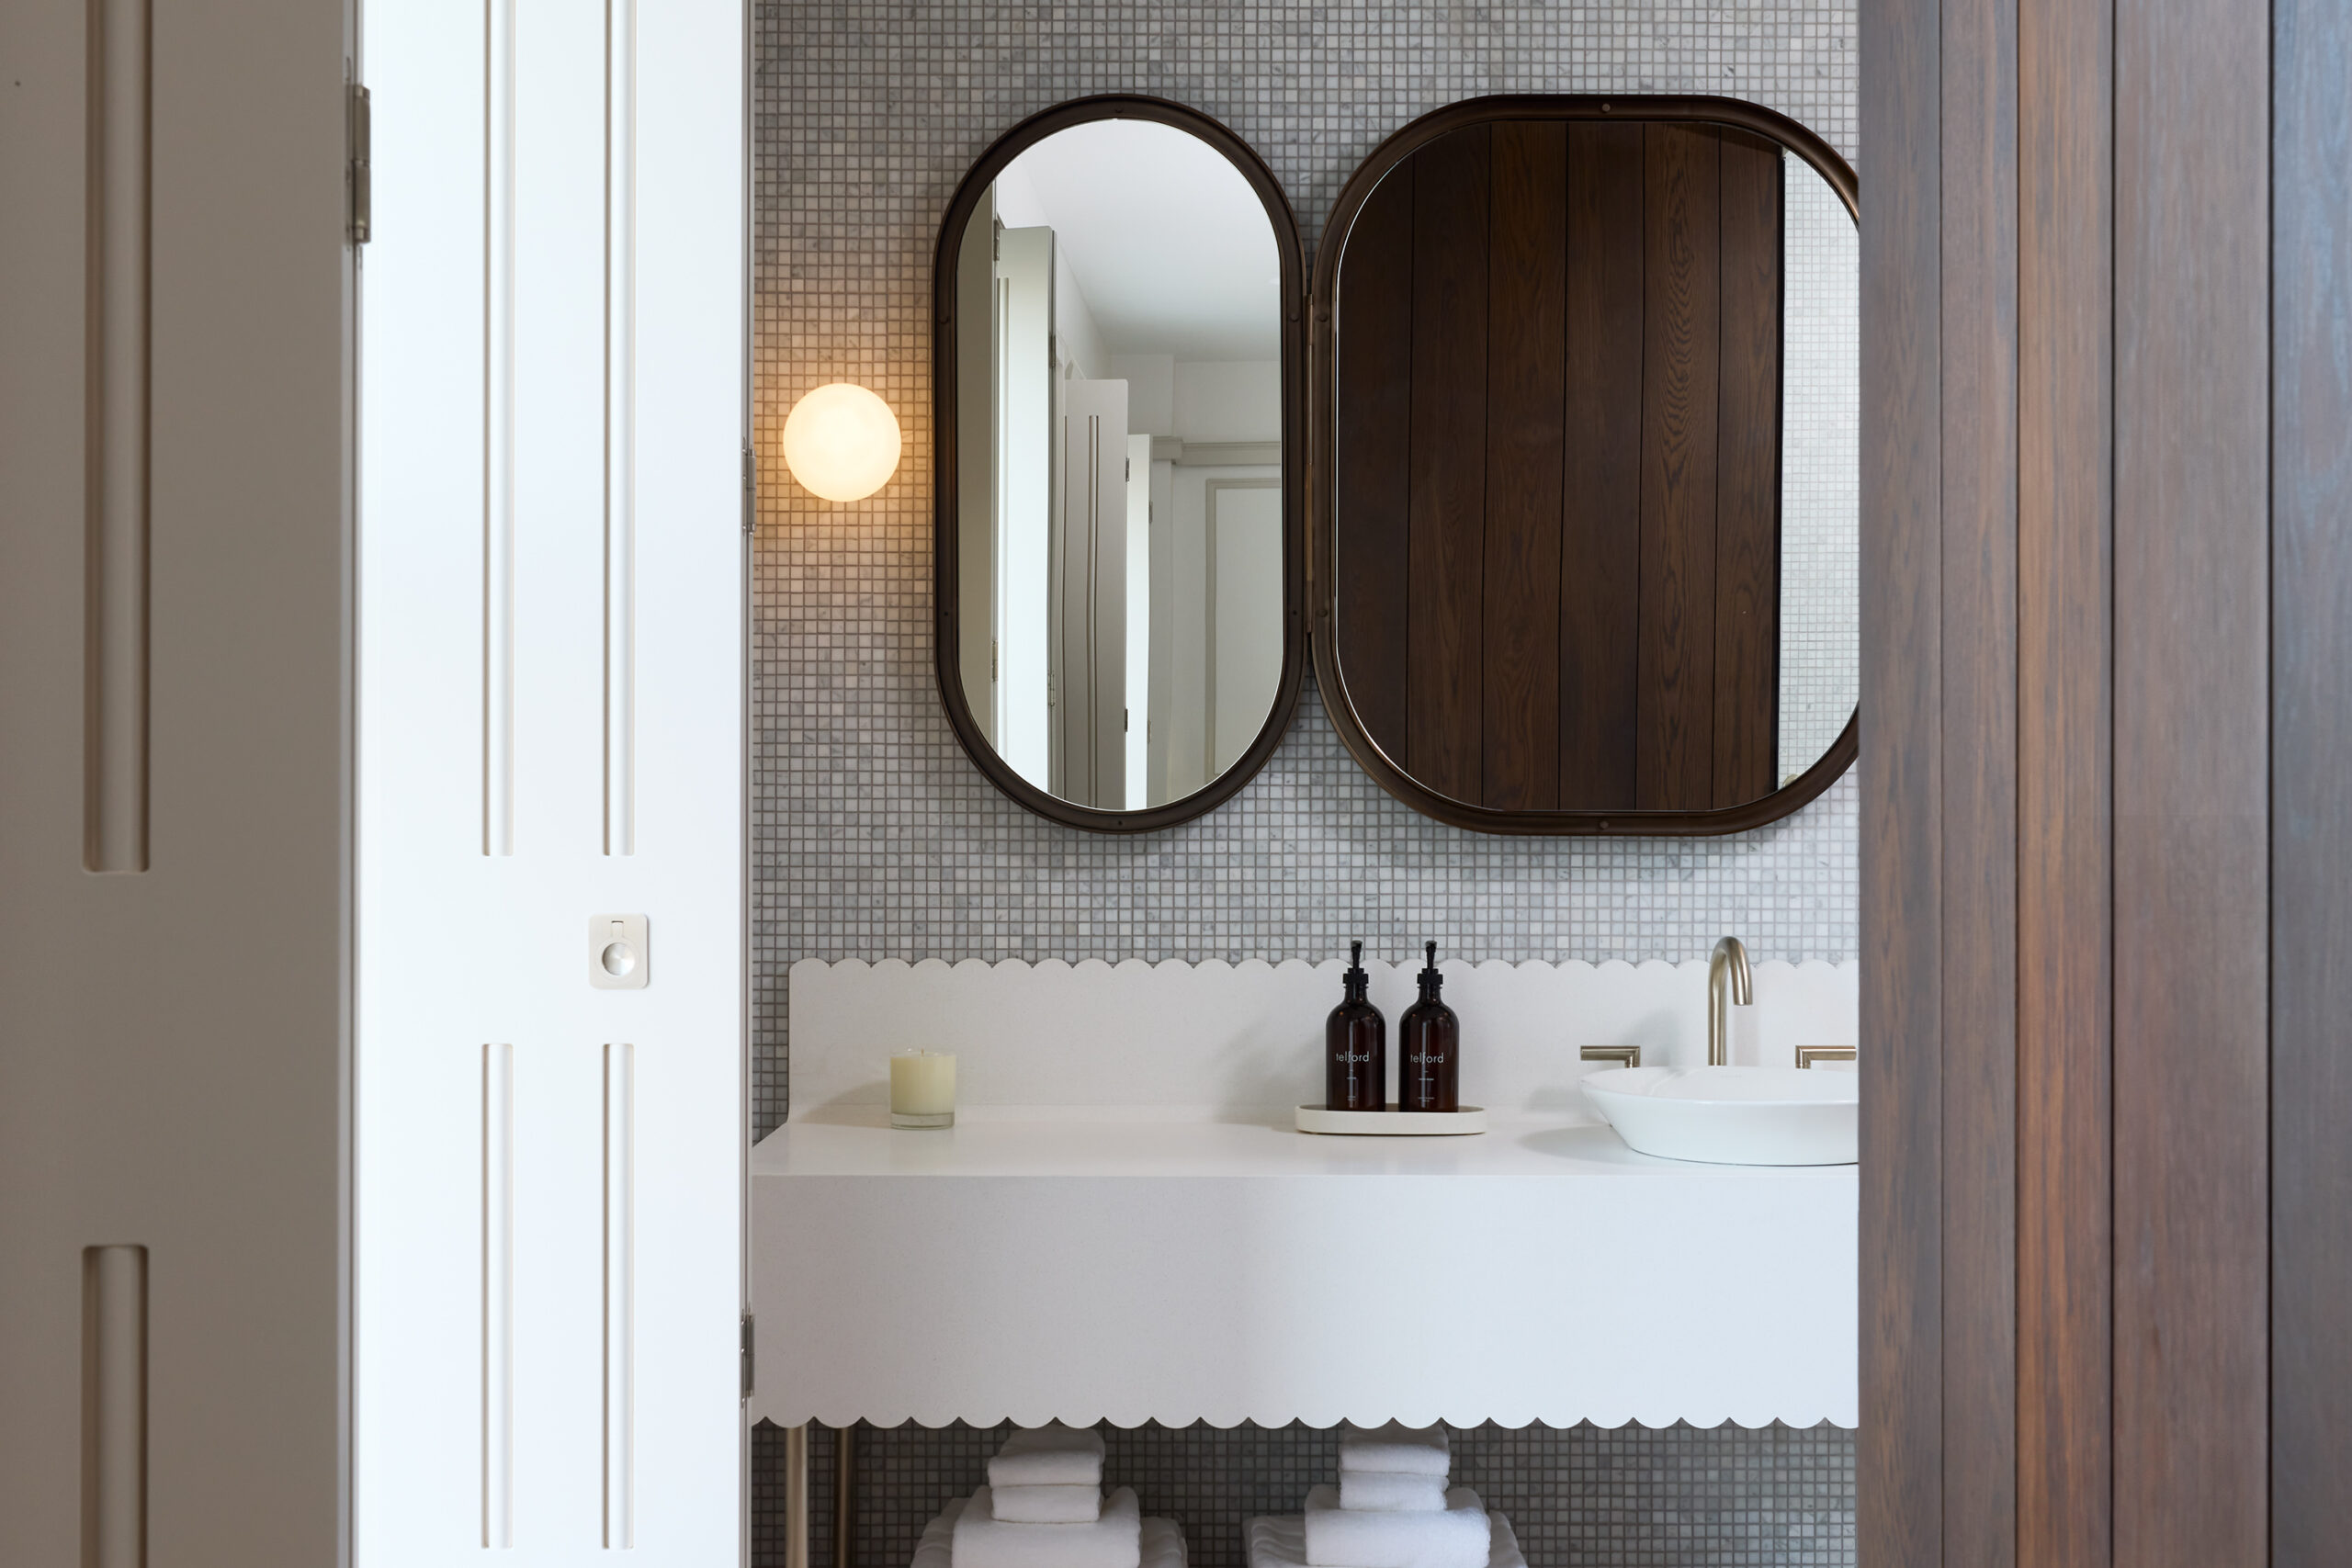 Black rimmed mirrors on a tiled wall, white counter, and white bowl sink with gold fixtures